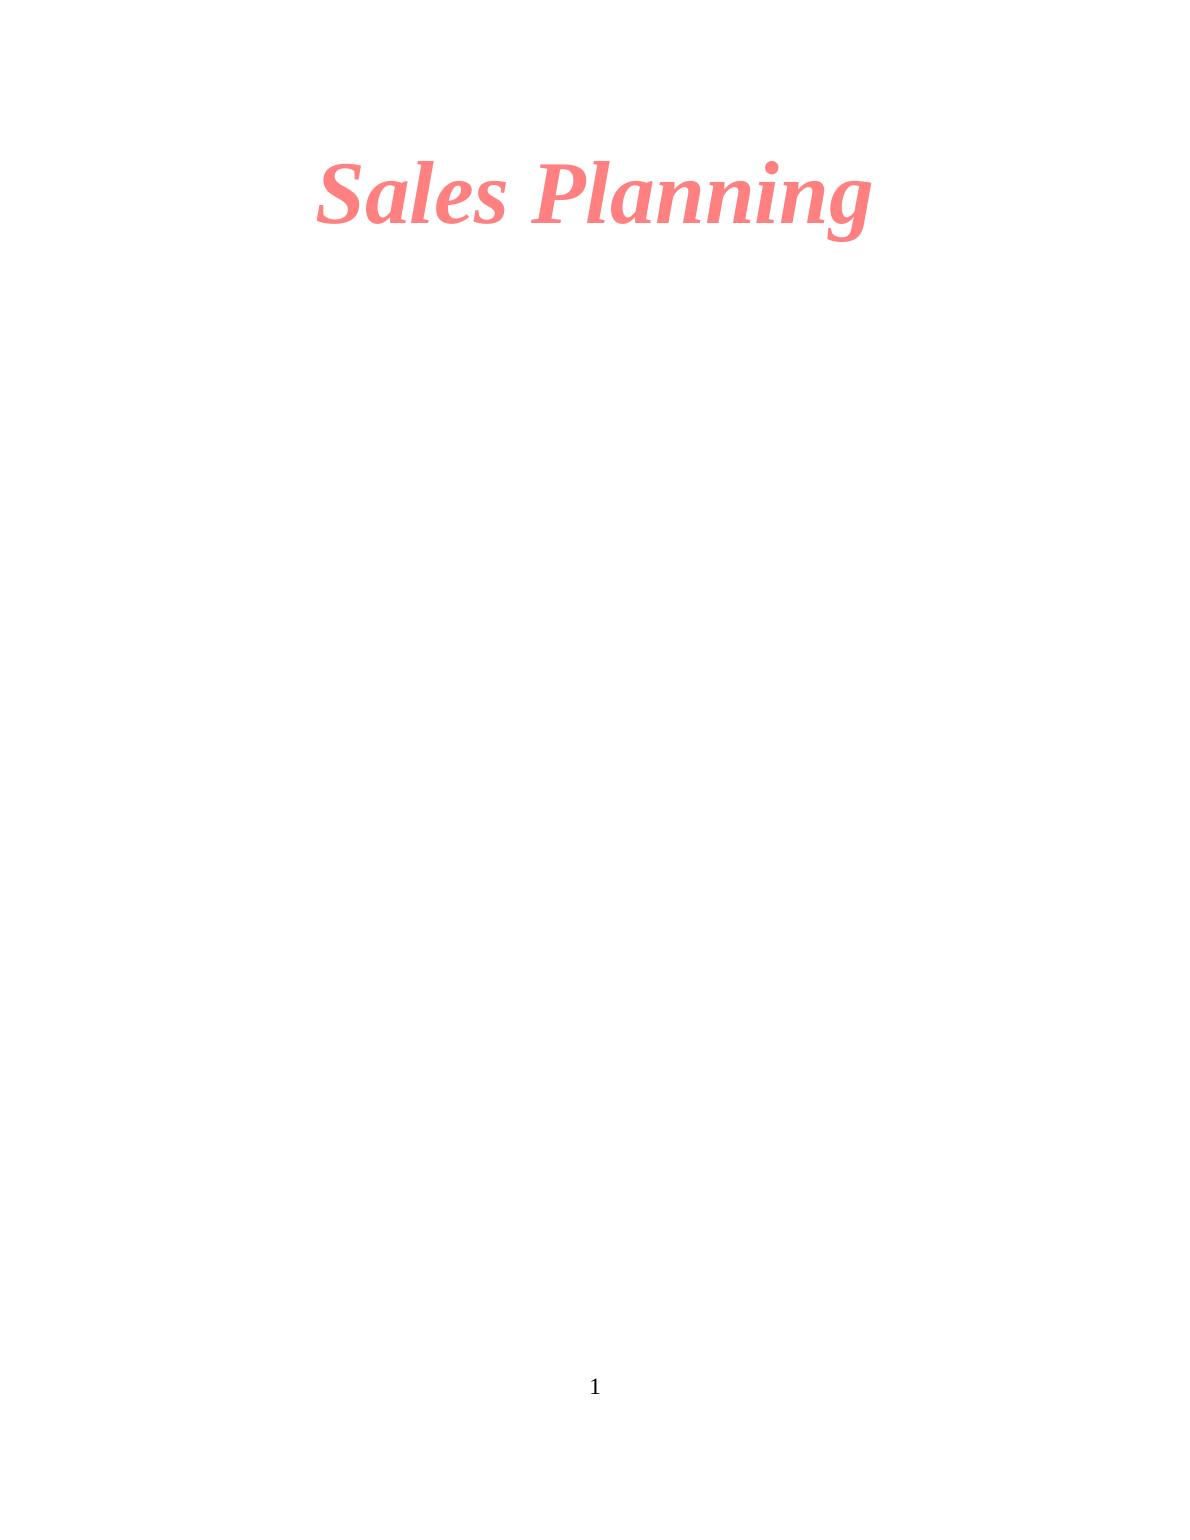 Sales Planning - Assignment_1